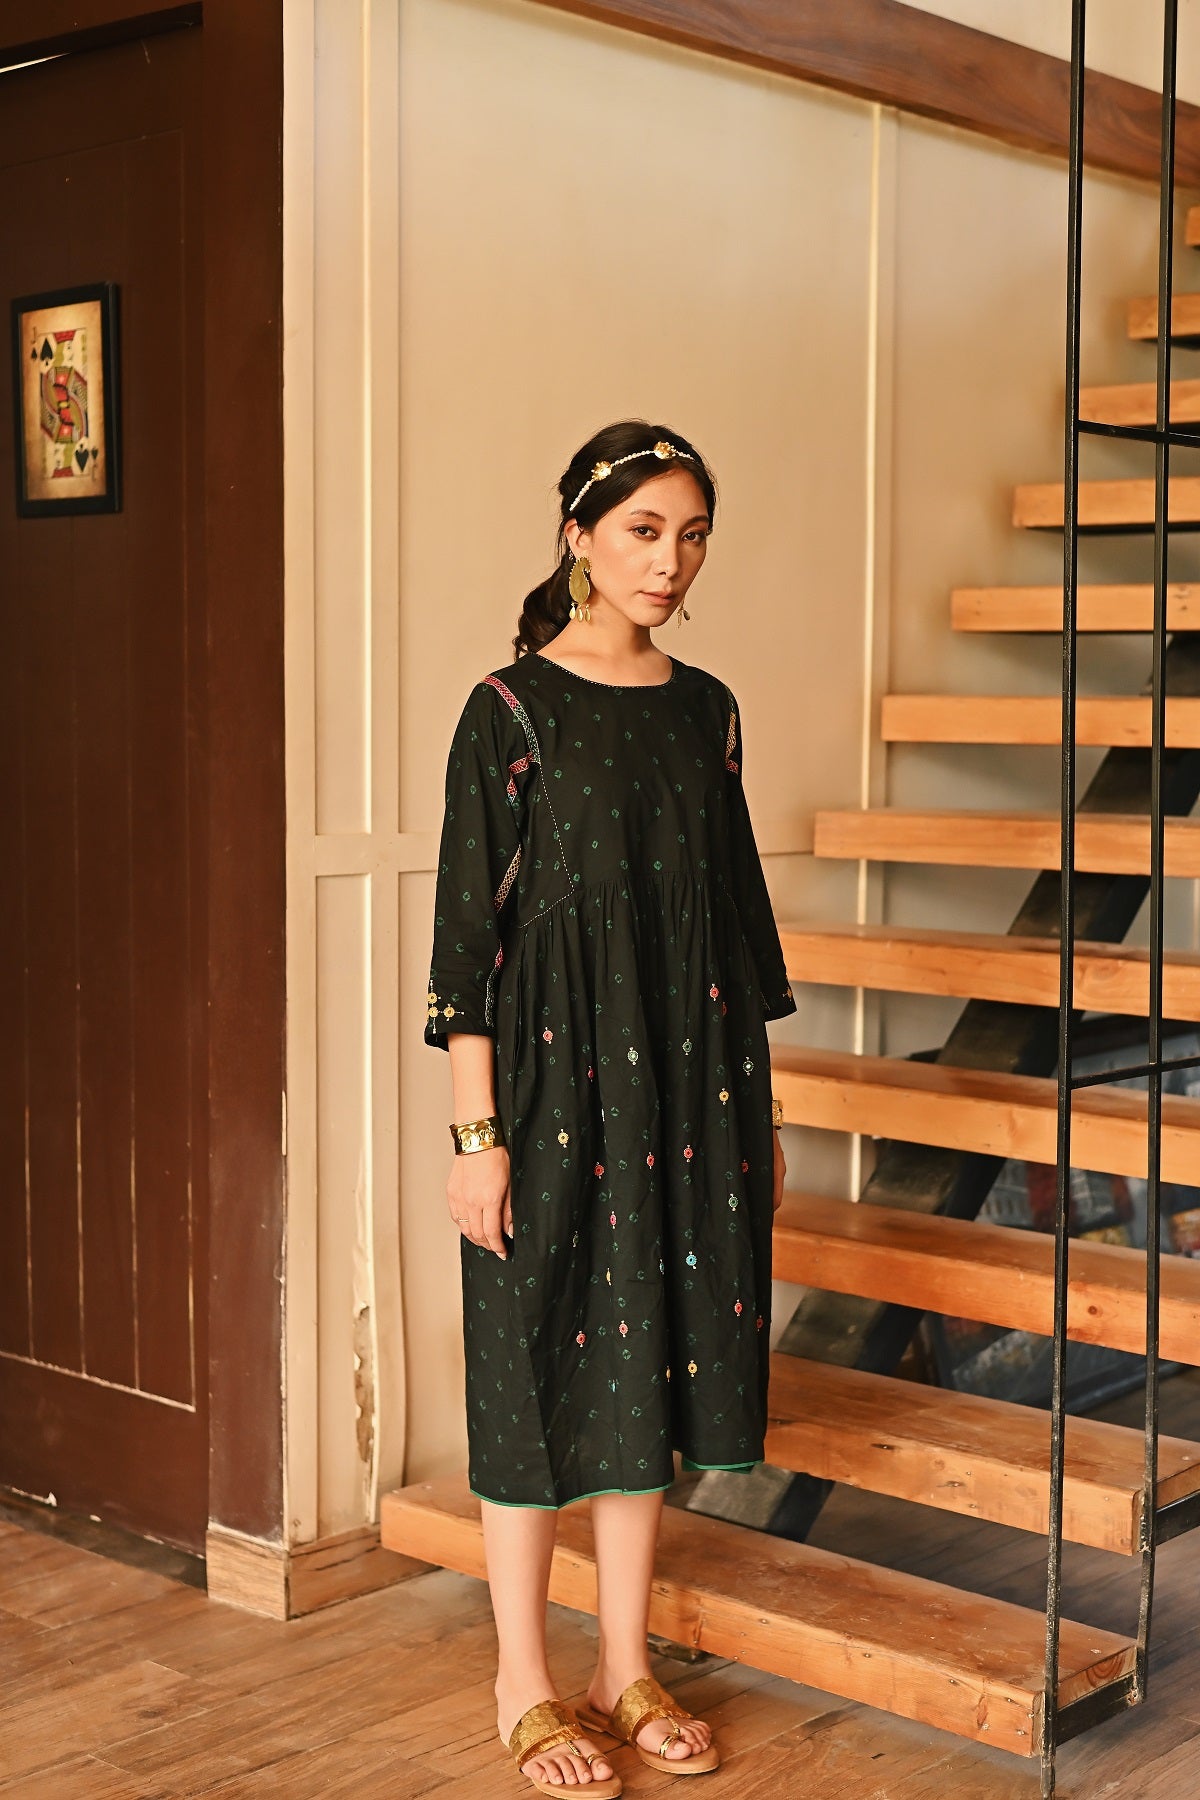 Kaanch Round Neck Bandhej And Embroidered Black Dress